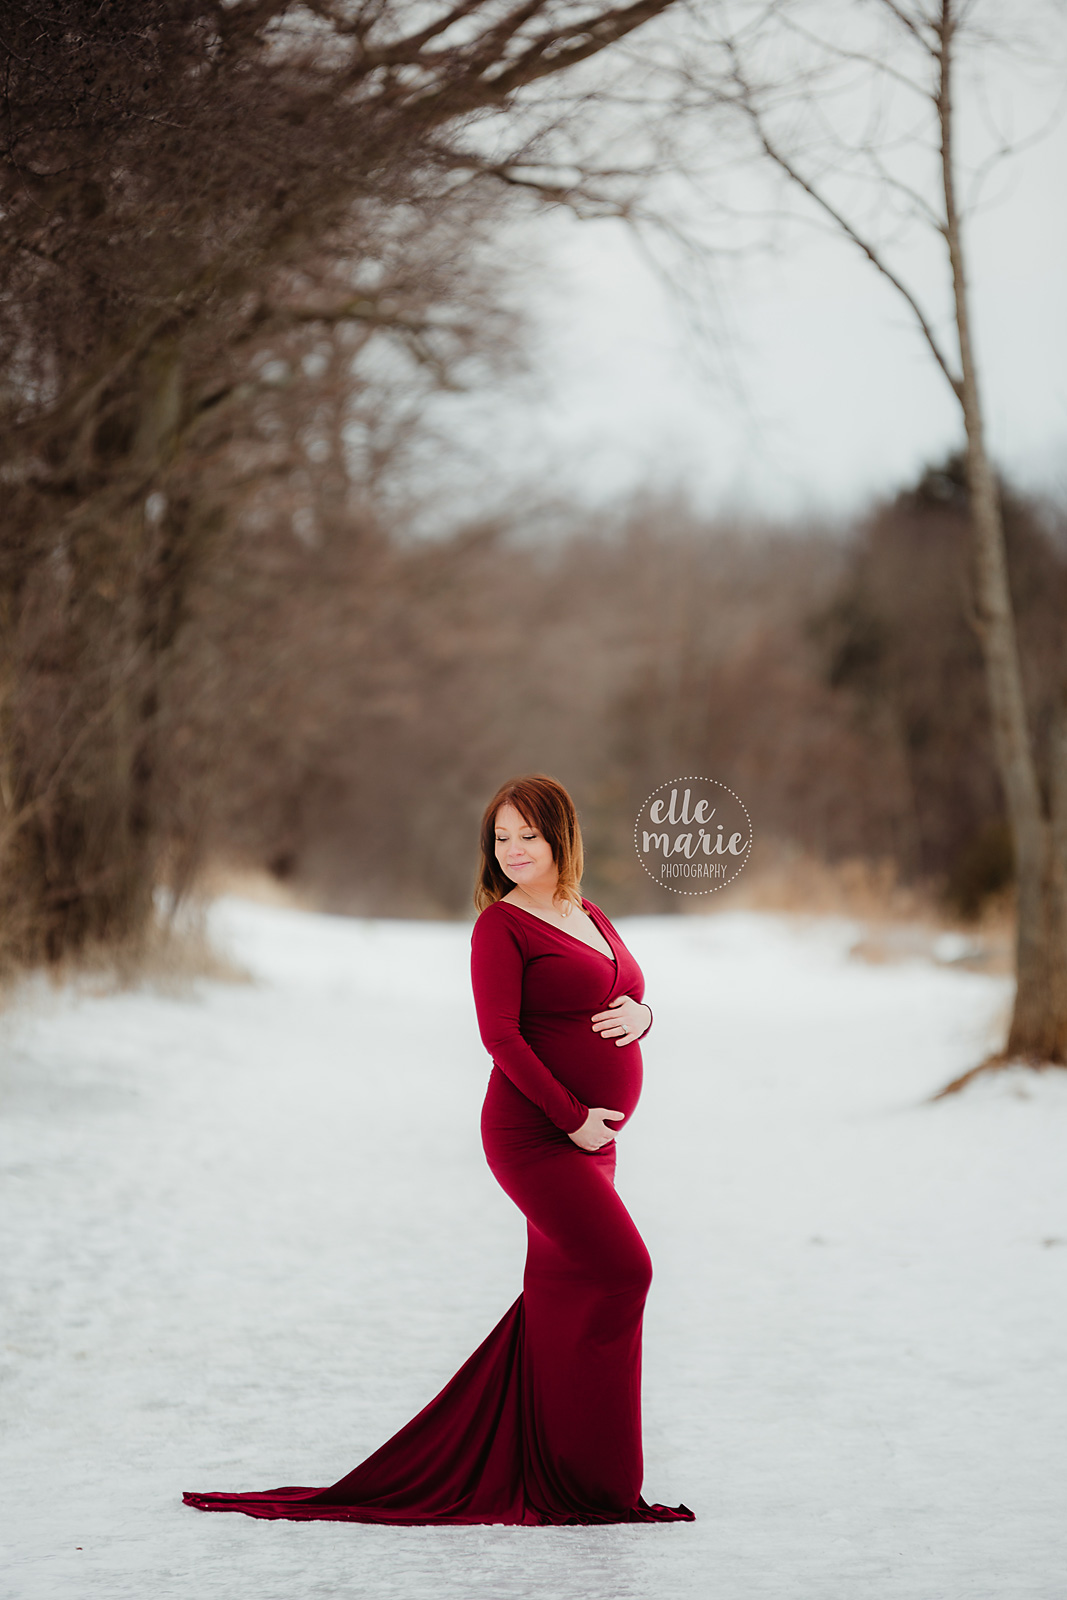 expecting mother in red gown in winter setting looking over shoulder